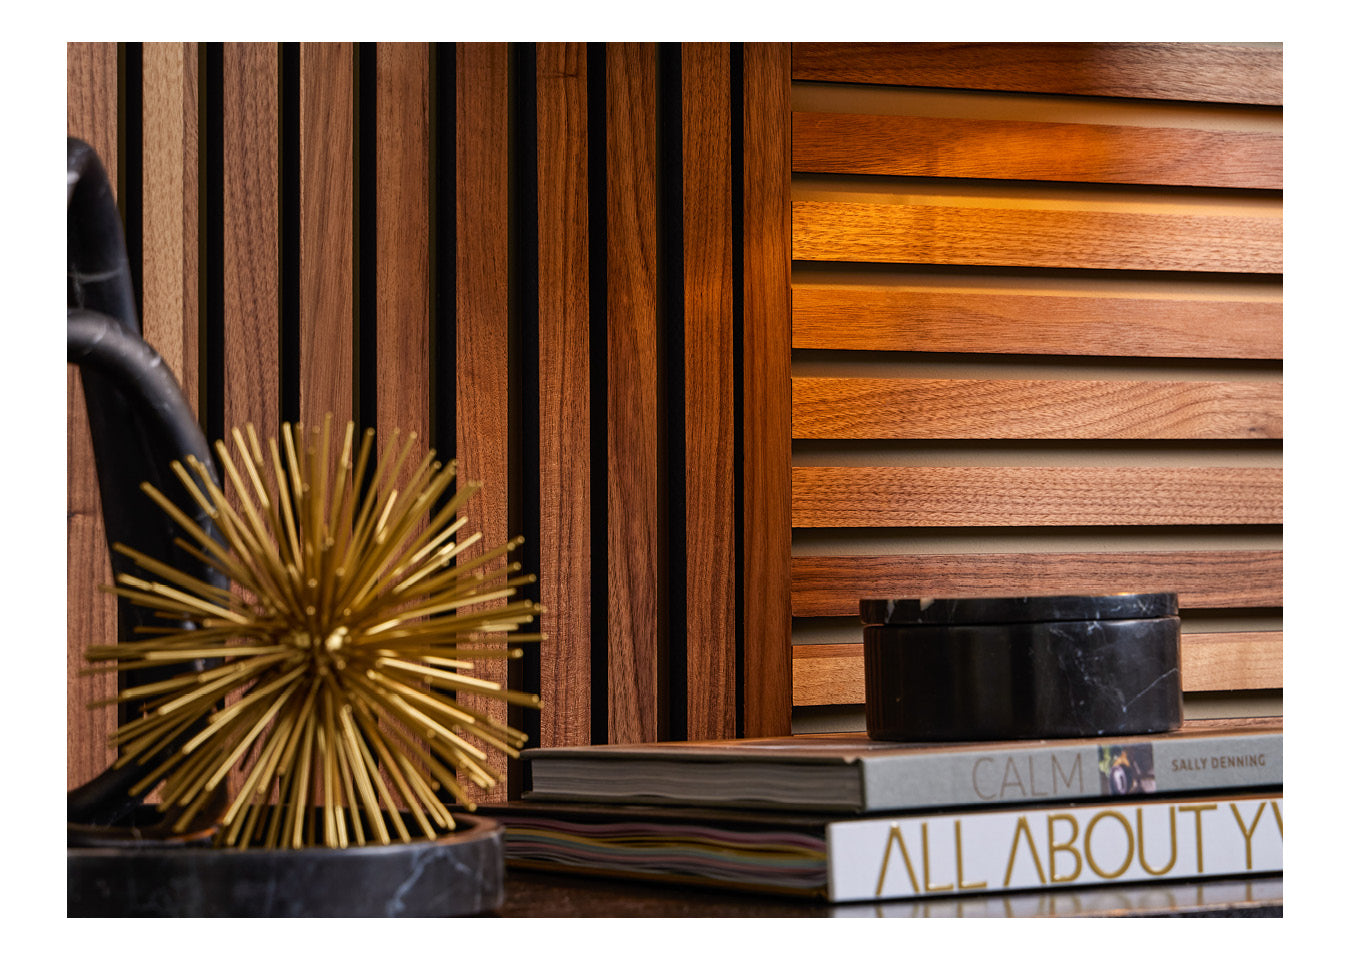 Close up image of the Deep Walnut SlatWall with books and decorative items in front on a table